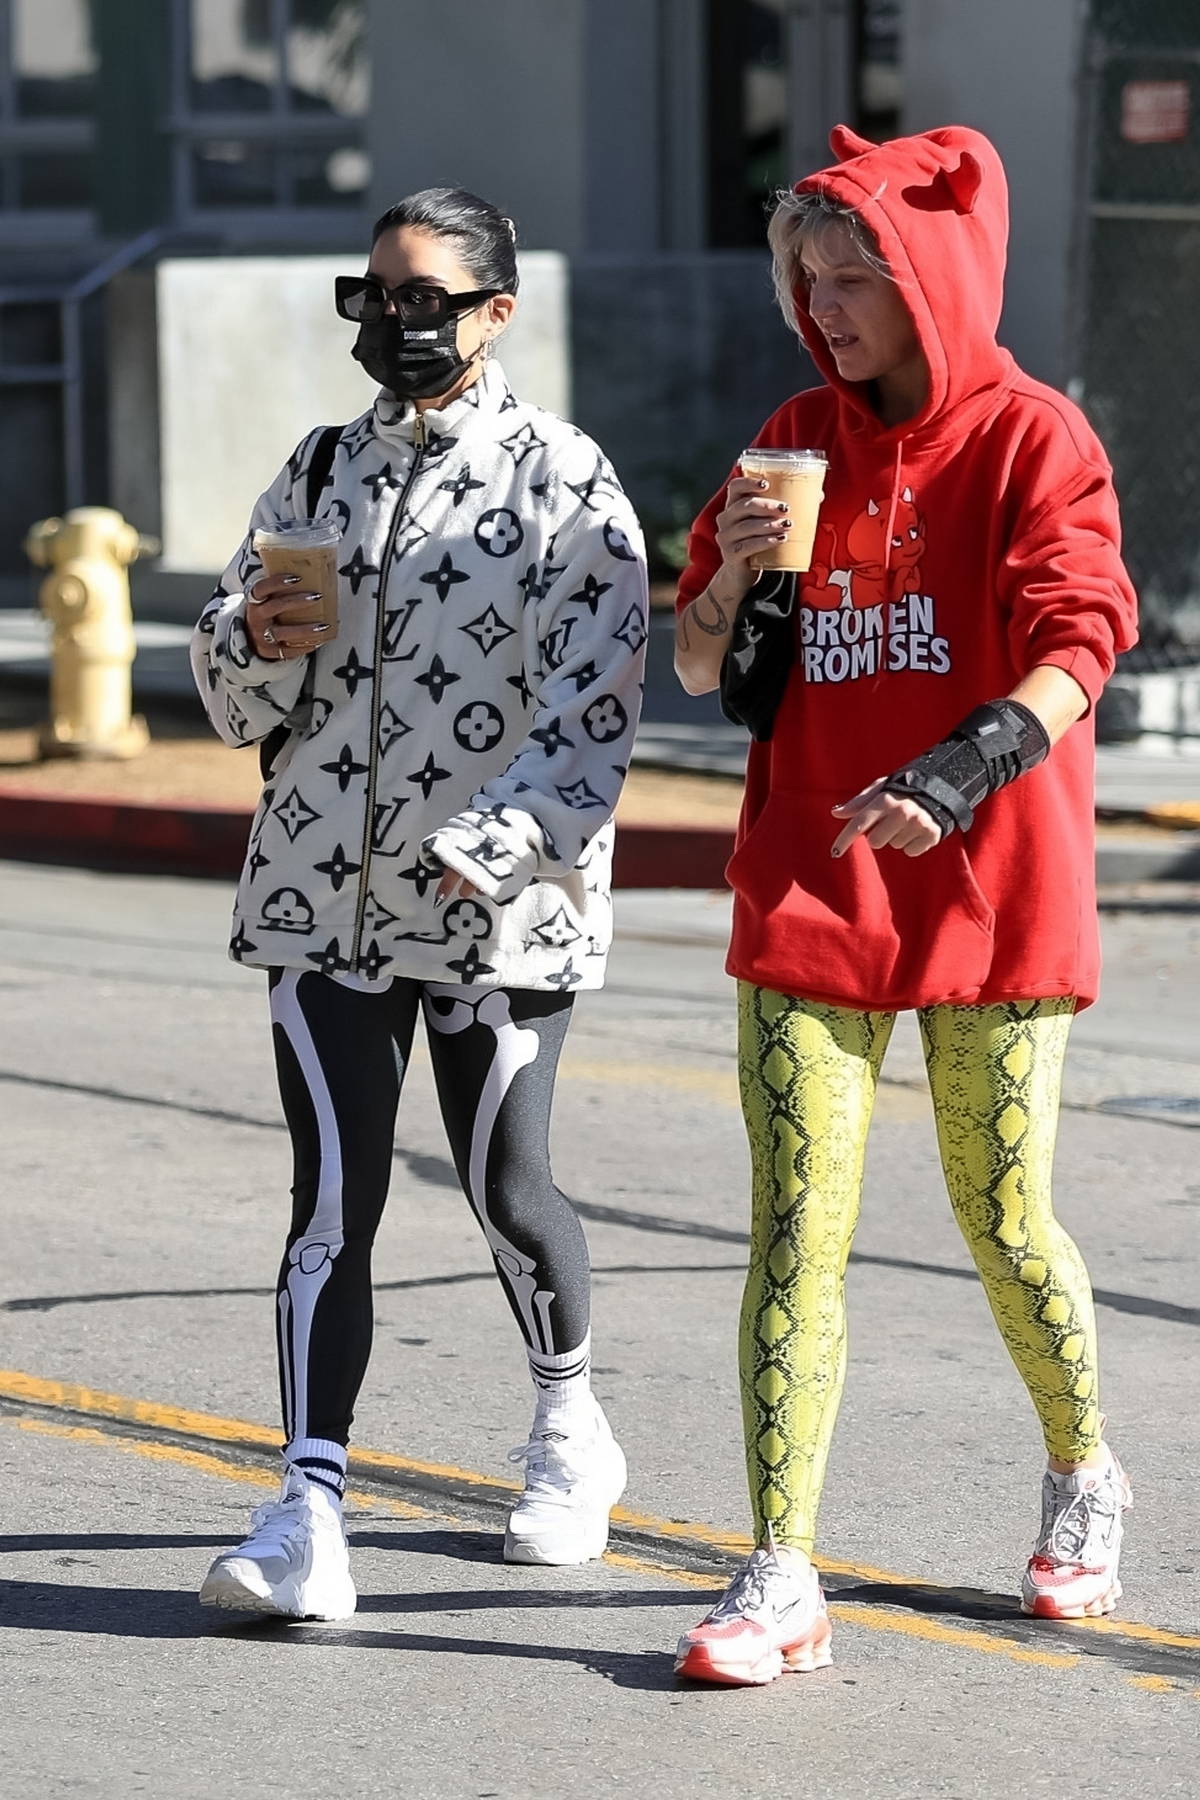 https://www.celebsfirst.com/wp-content/uploads/2021/10/vanessa-hudgens-rocks-louis-vuitton-jacket-with-leggings-as-she-grabs-a-coffee-with-friends-in-west-hollywood-california-261021_8.jpg